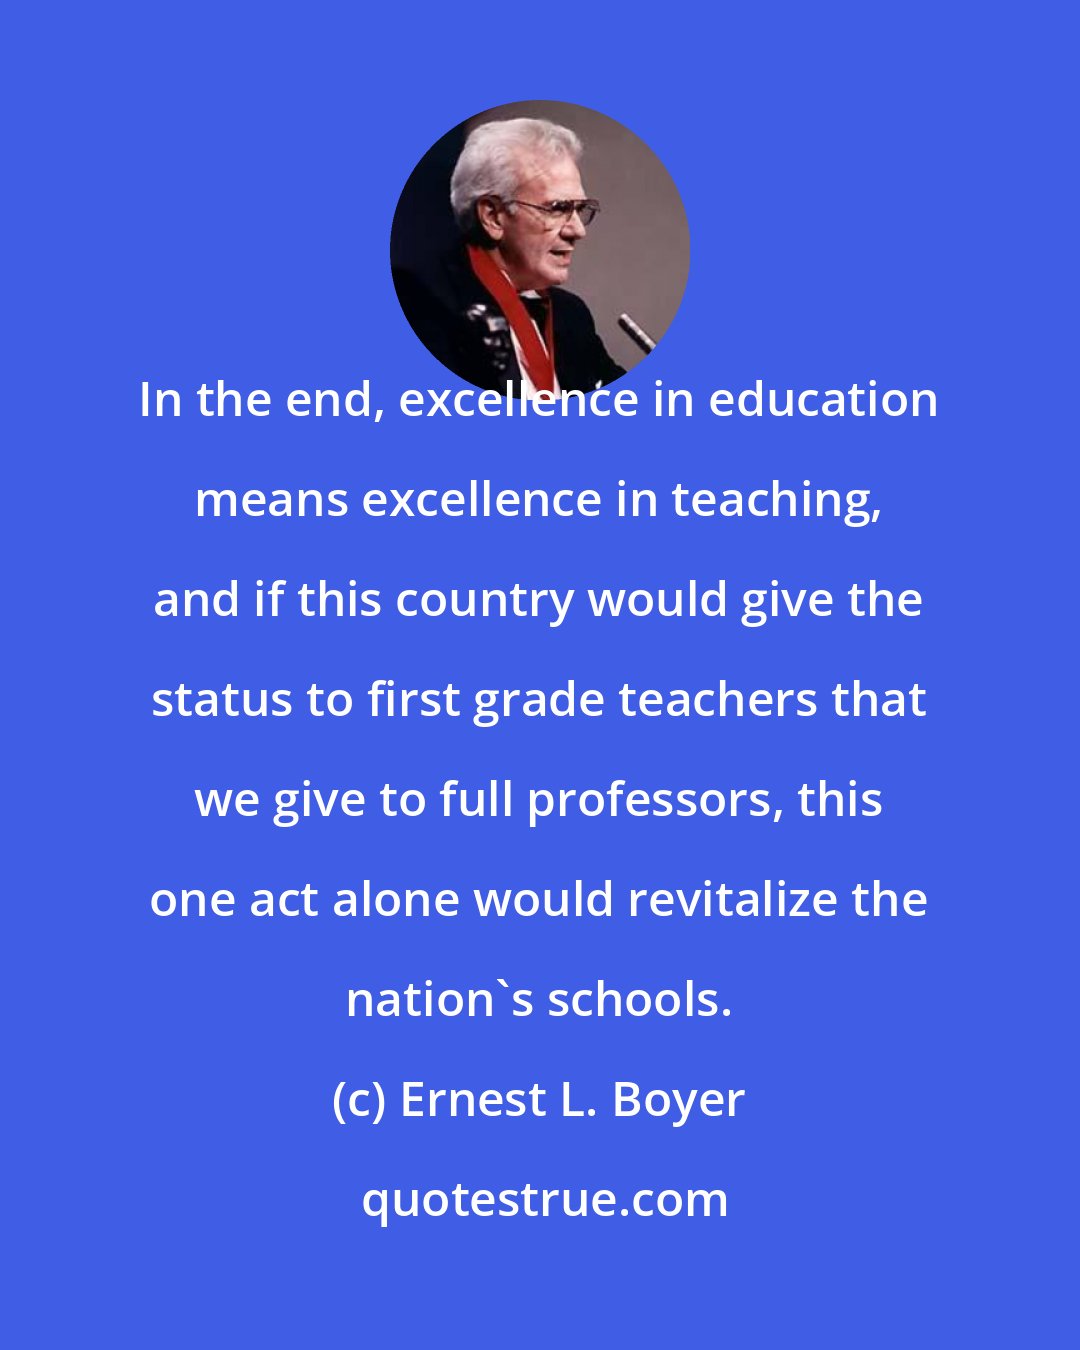 Ernest L. Boyer: In the end, excellence in education means excellence in teaching, and if this country would give the status to first grade teachers that we give to full professors, this one act alone would revitalize the nation's schools.